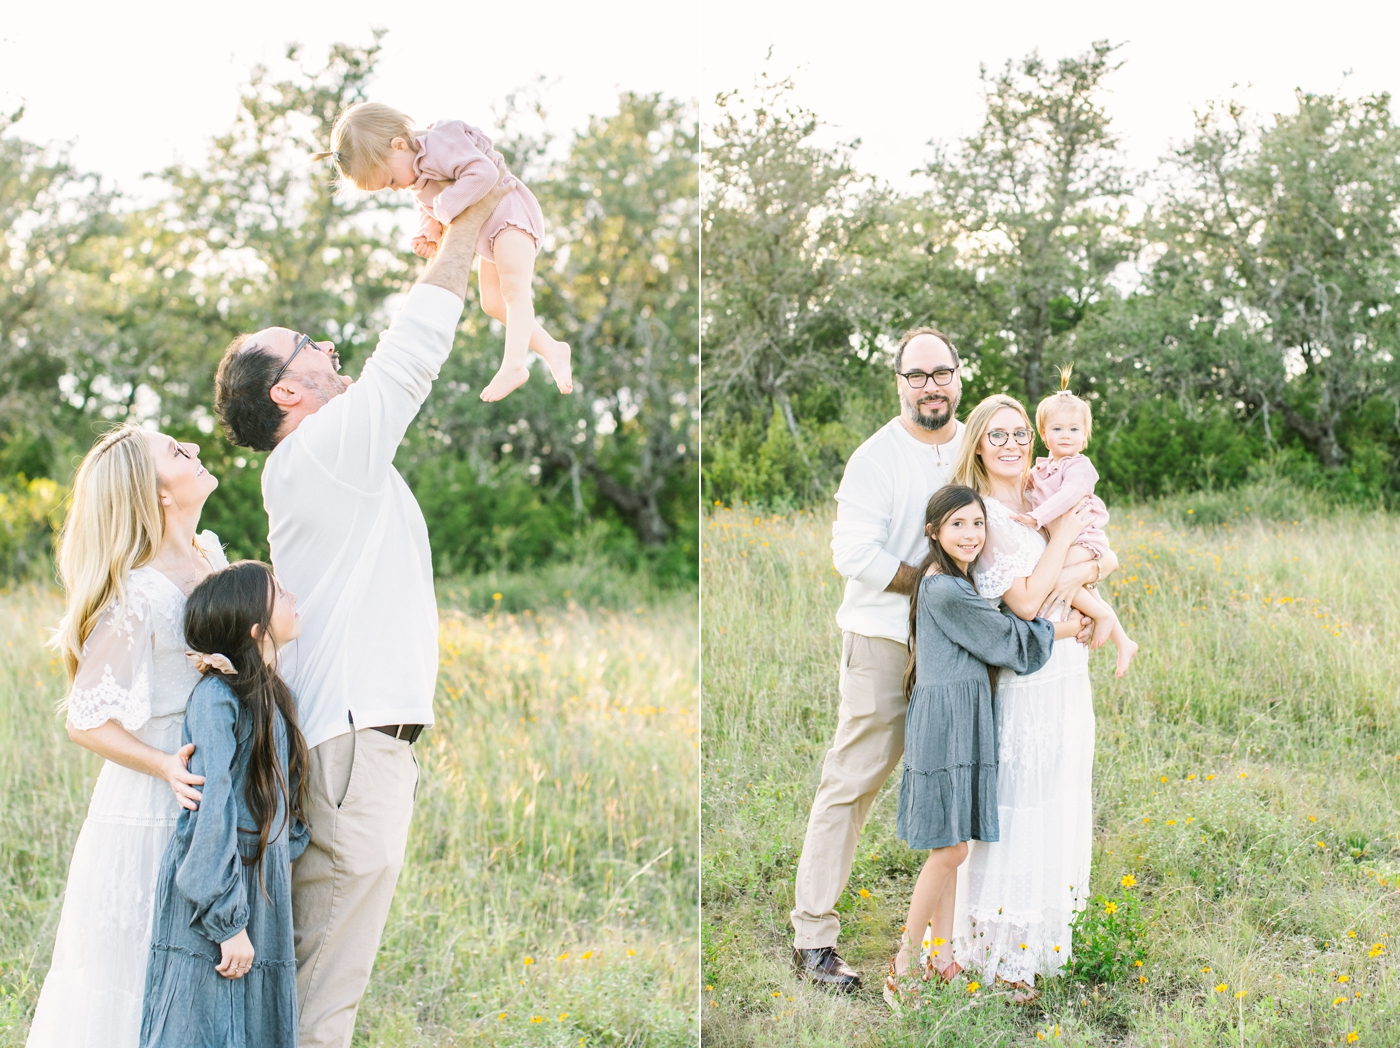 Family portraits in field surrounded by sunlight and tall grass. Photo by Sana Ahmed Photography.